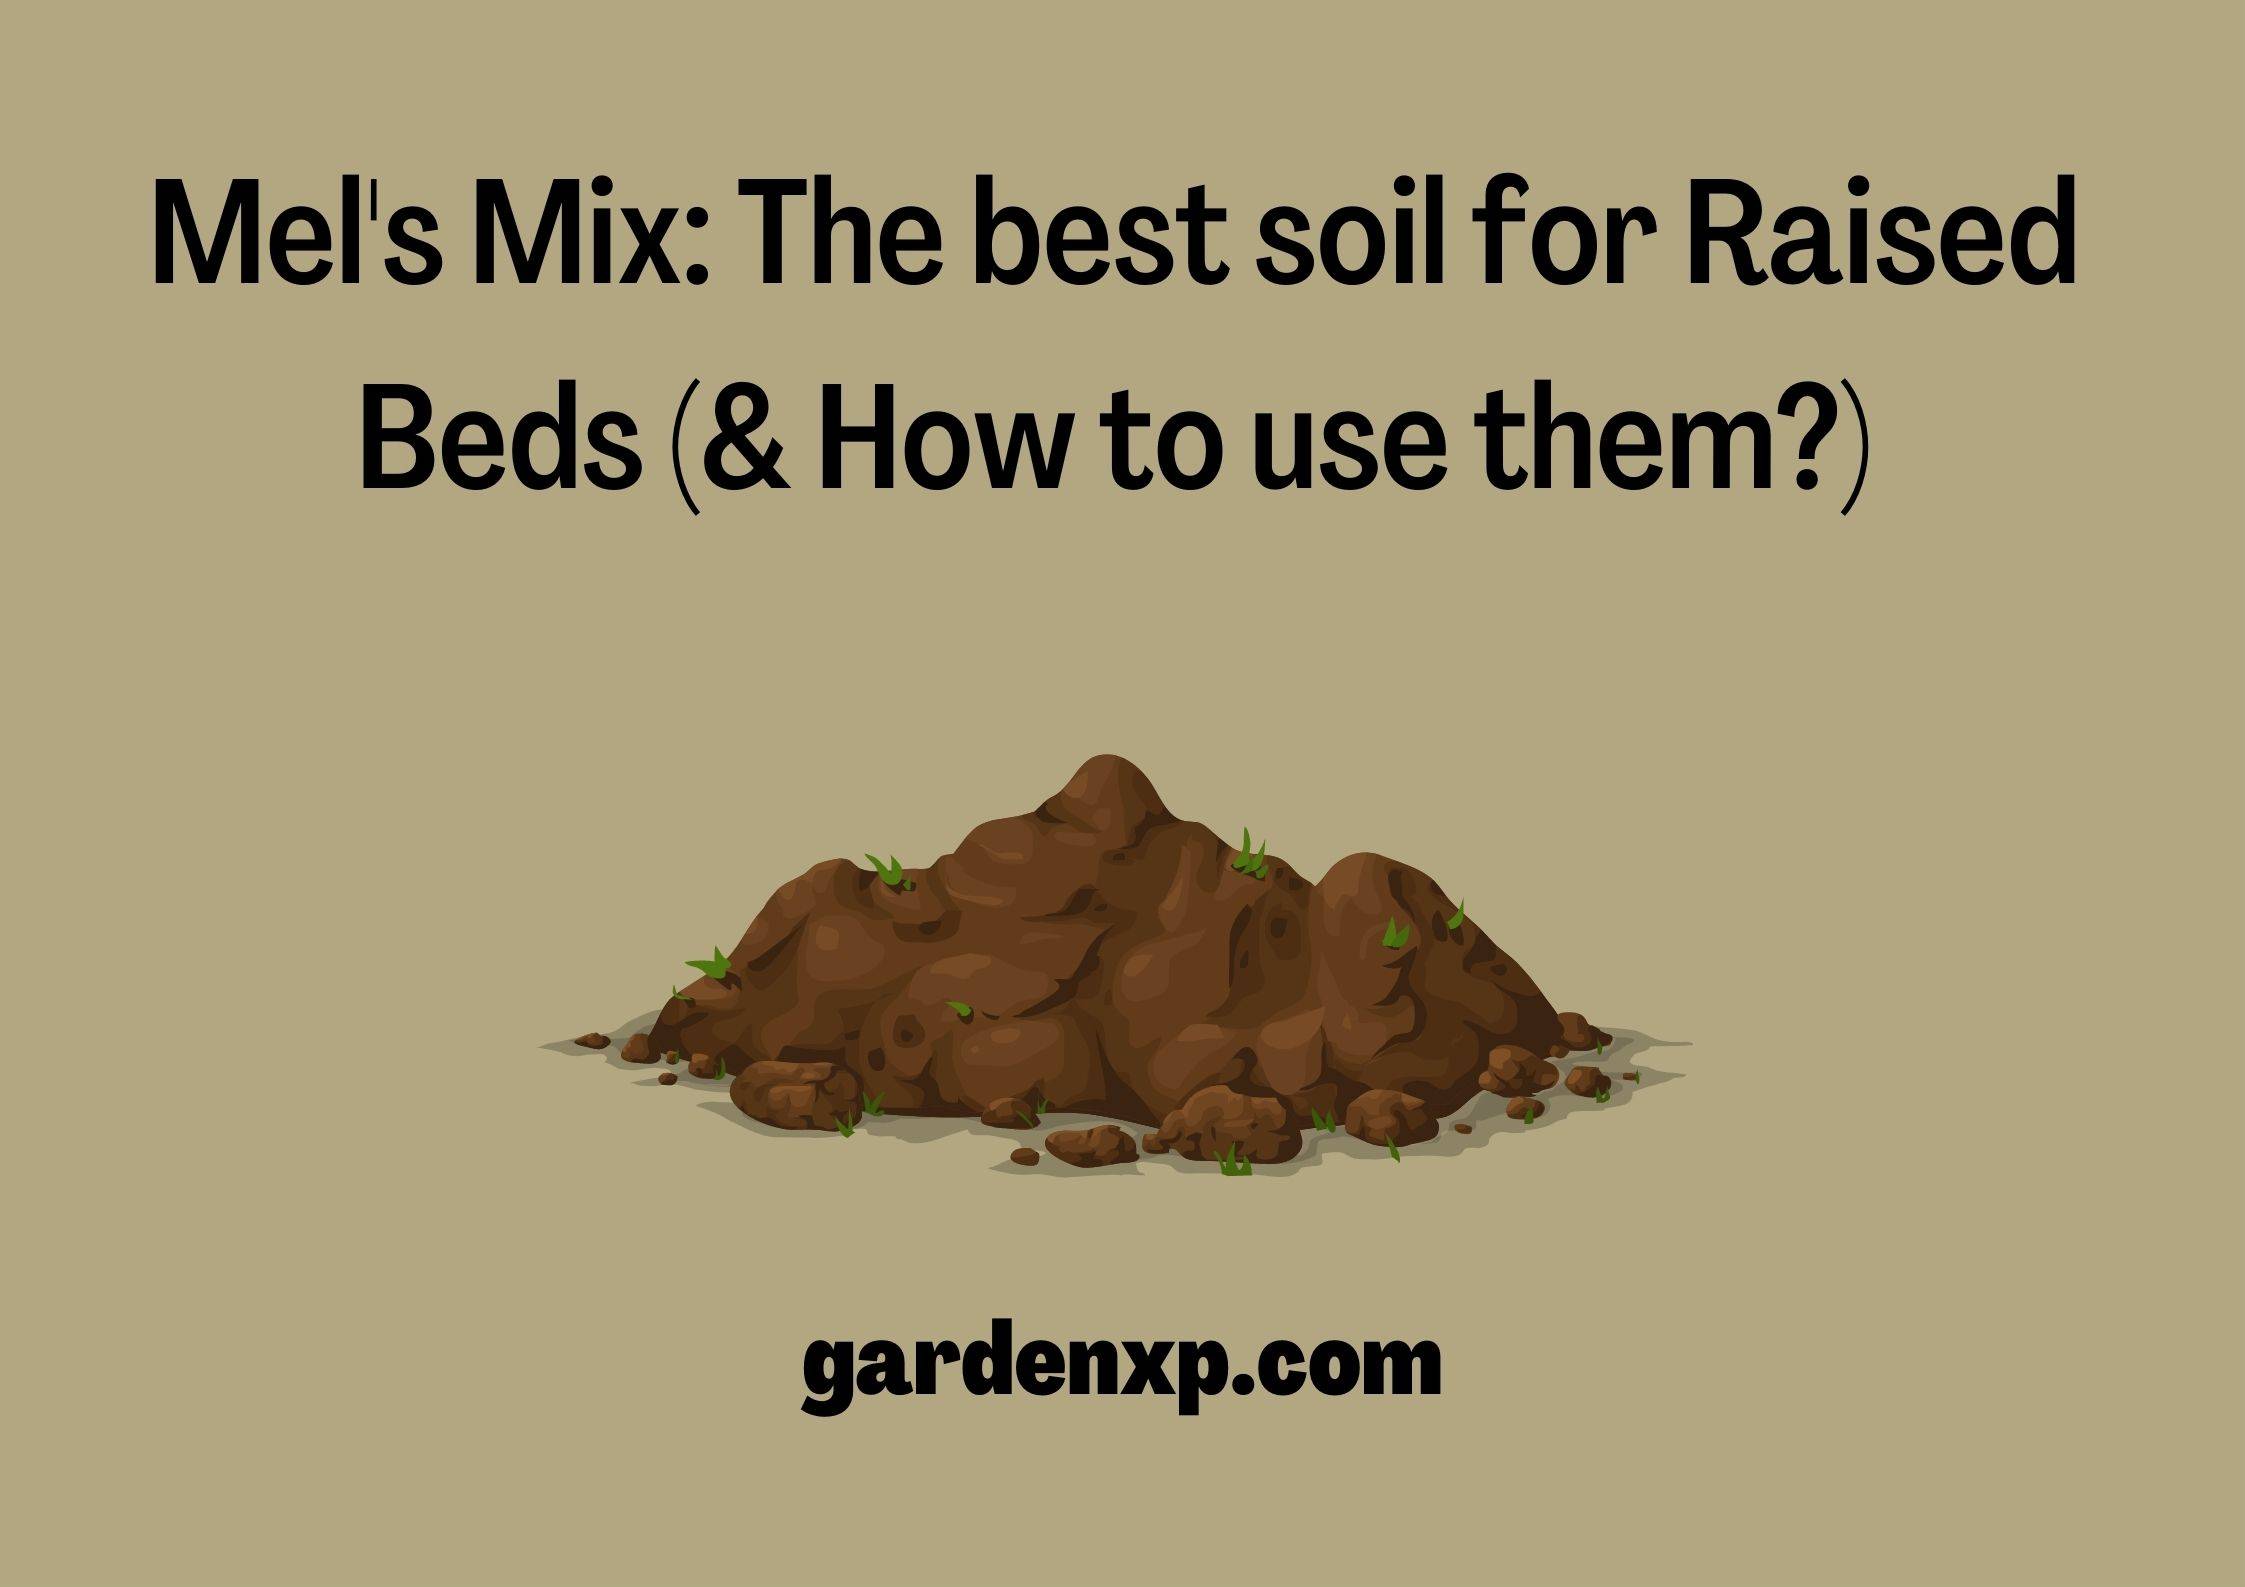 Mel's Mix: The best soil for Raised Beds (& How to use them?)